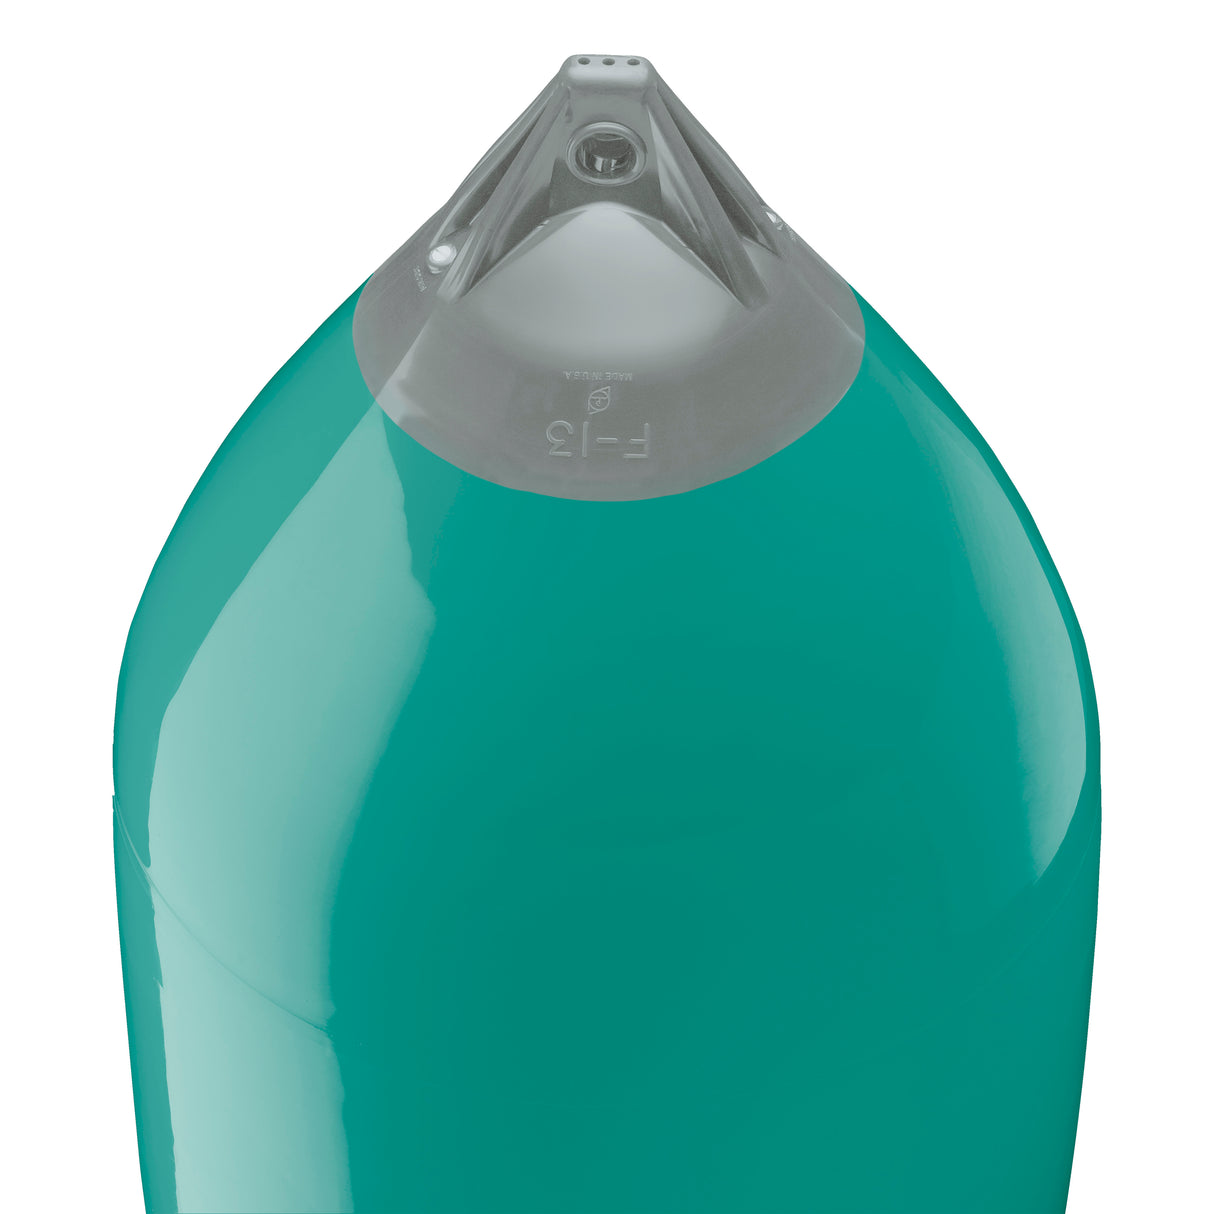 Teal boat fender with Grey-Top, Polyform F-13 angled shot